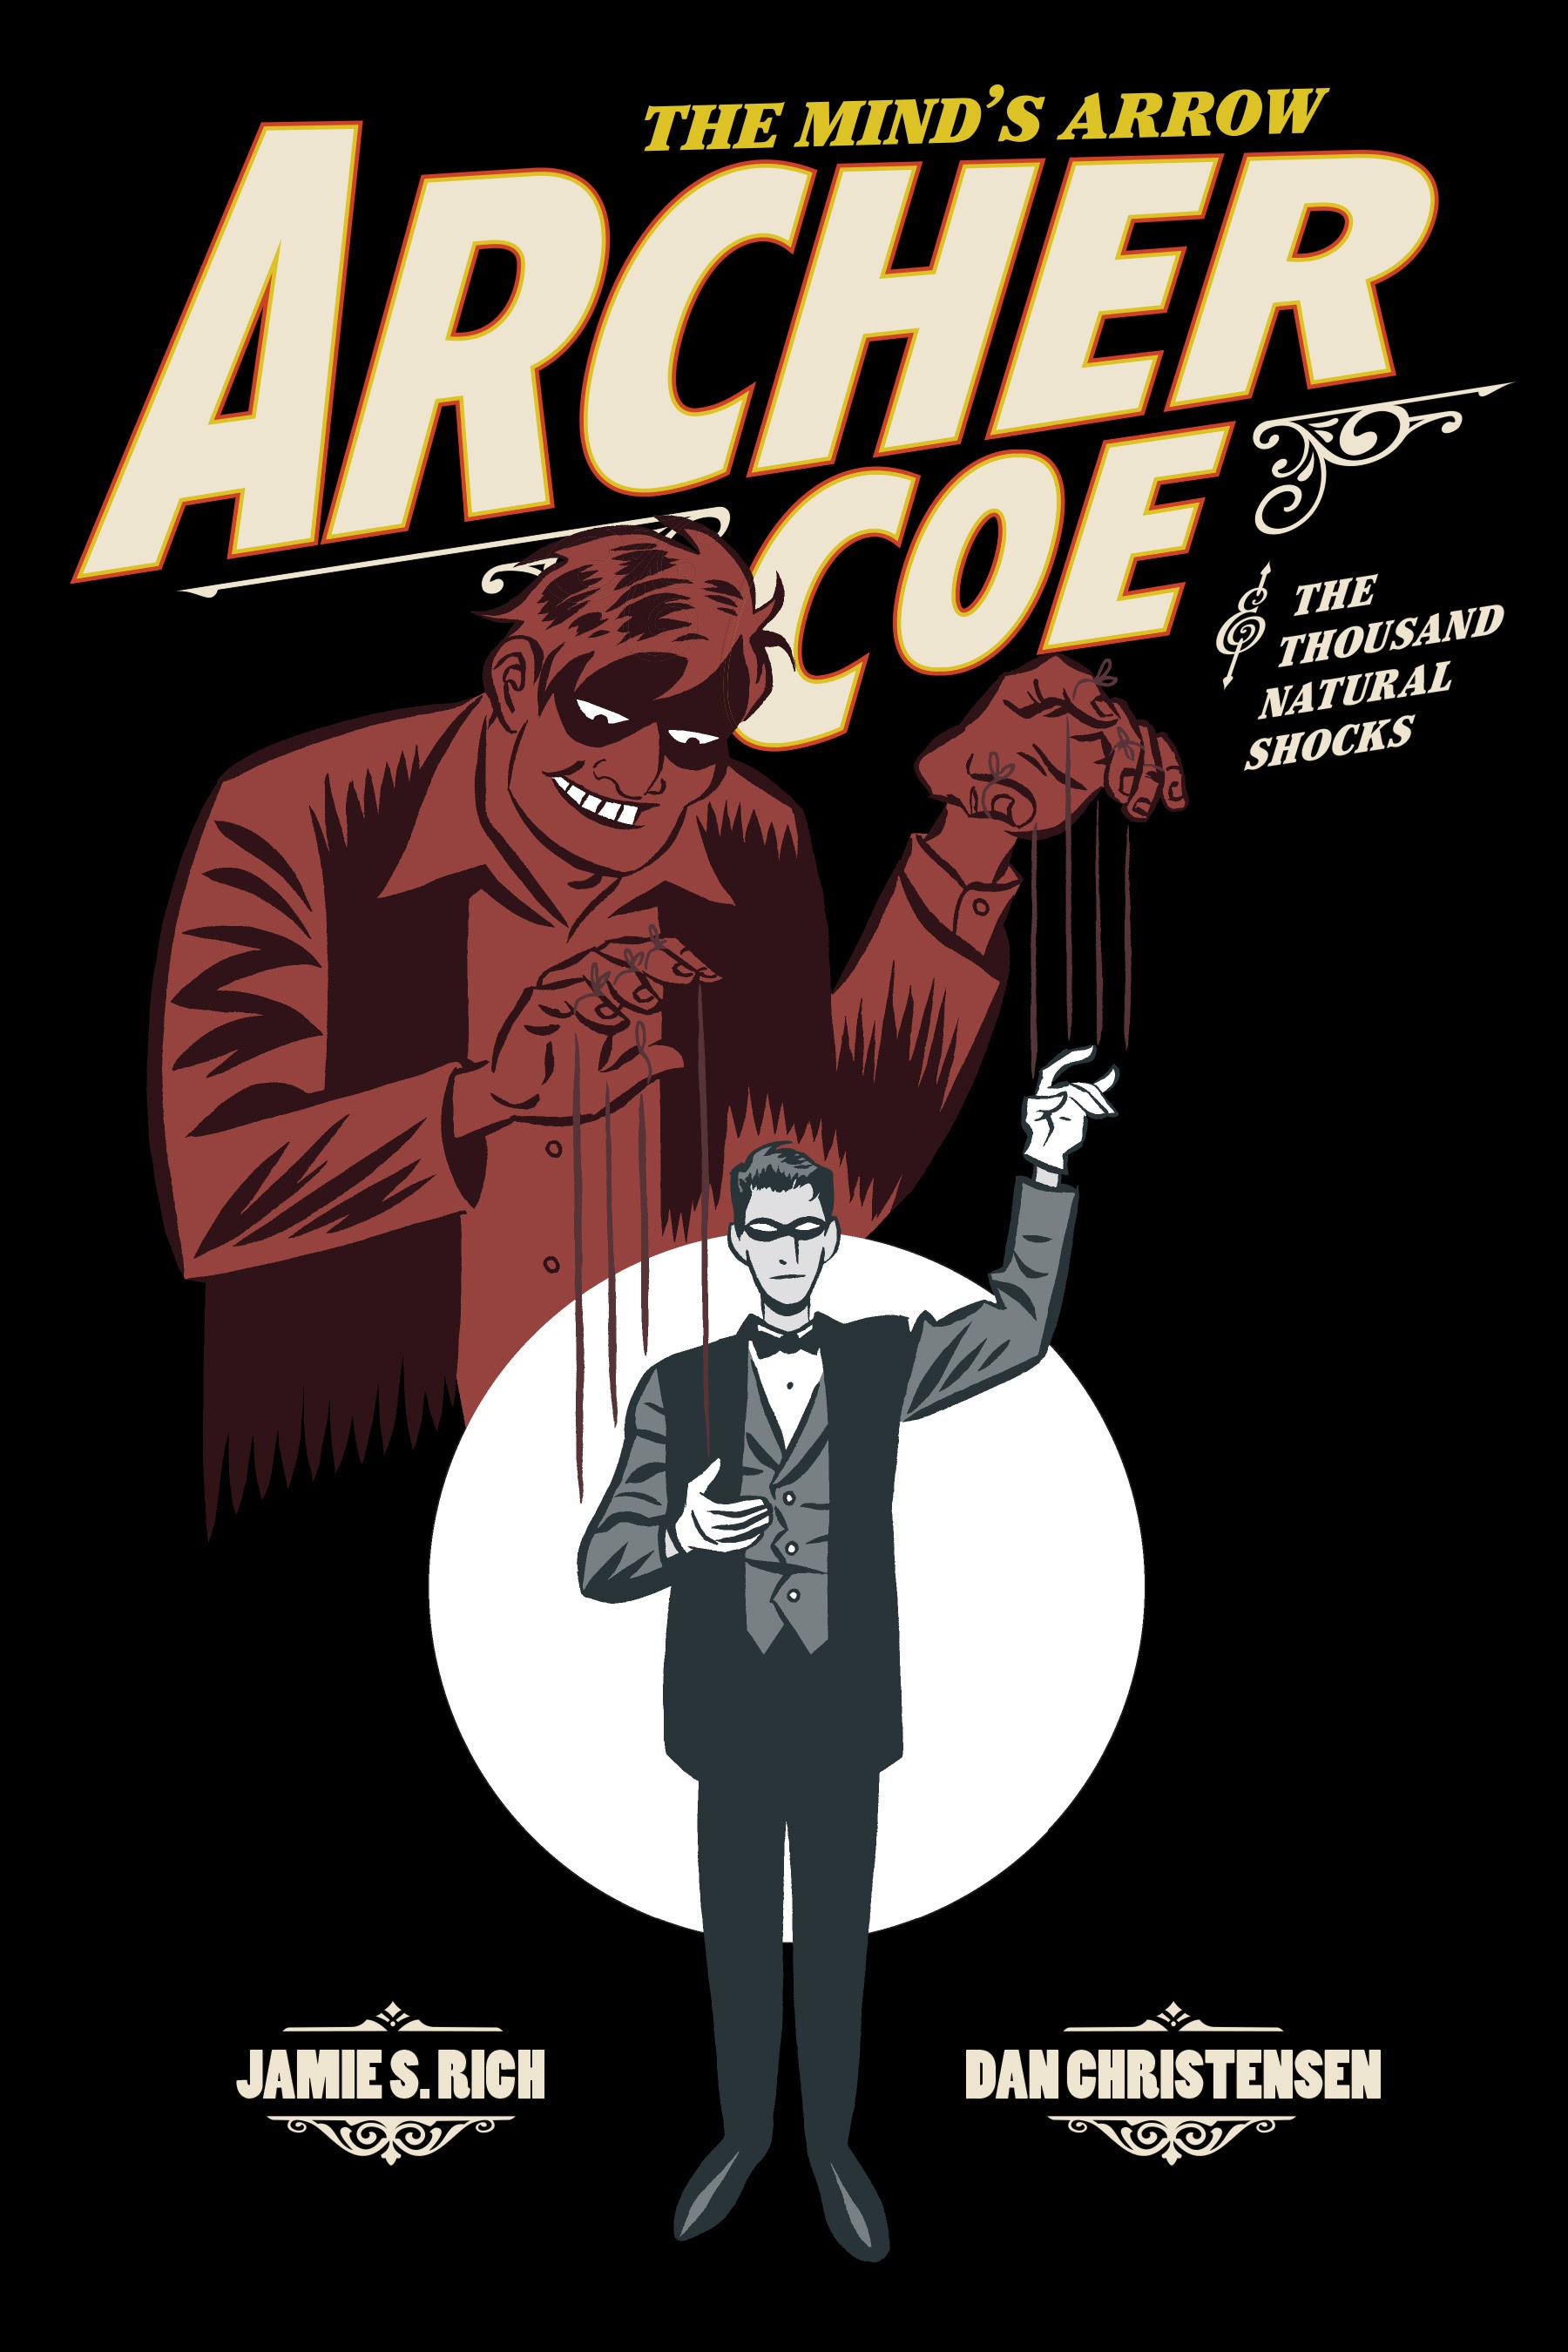 Read online Archer Coe and the Thousand Natural Shocks comic -  Issue #14 - 20